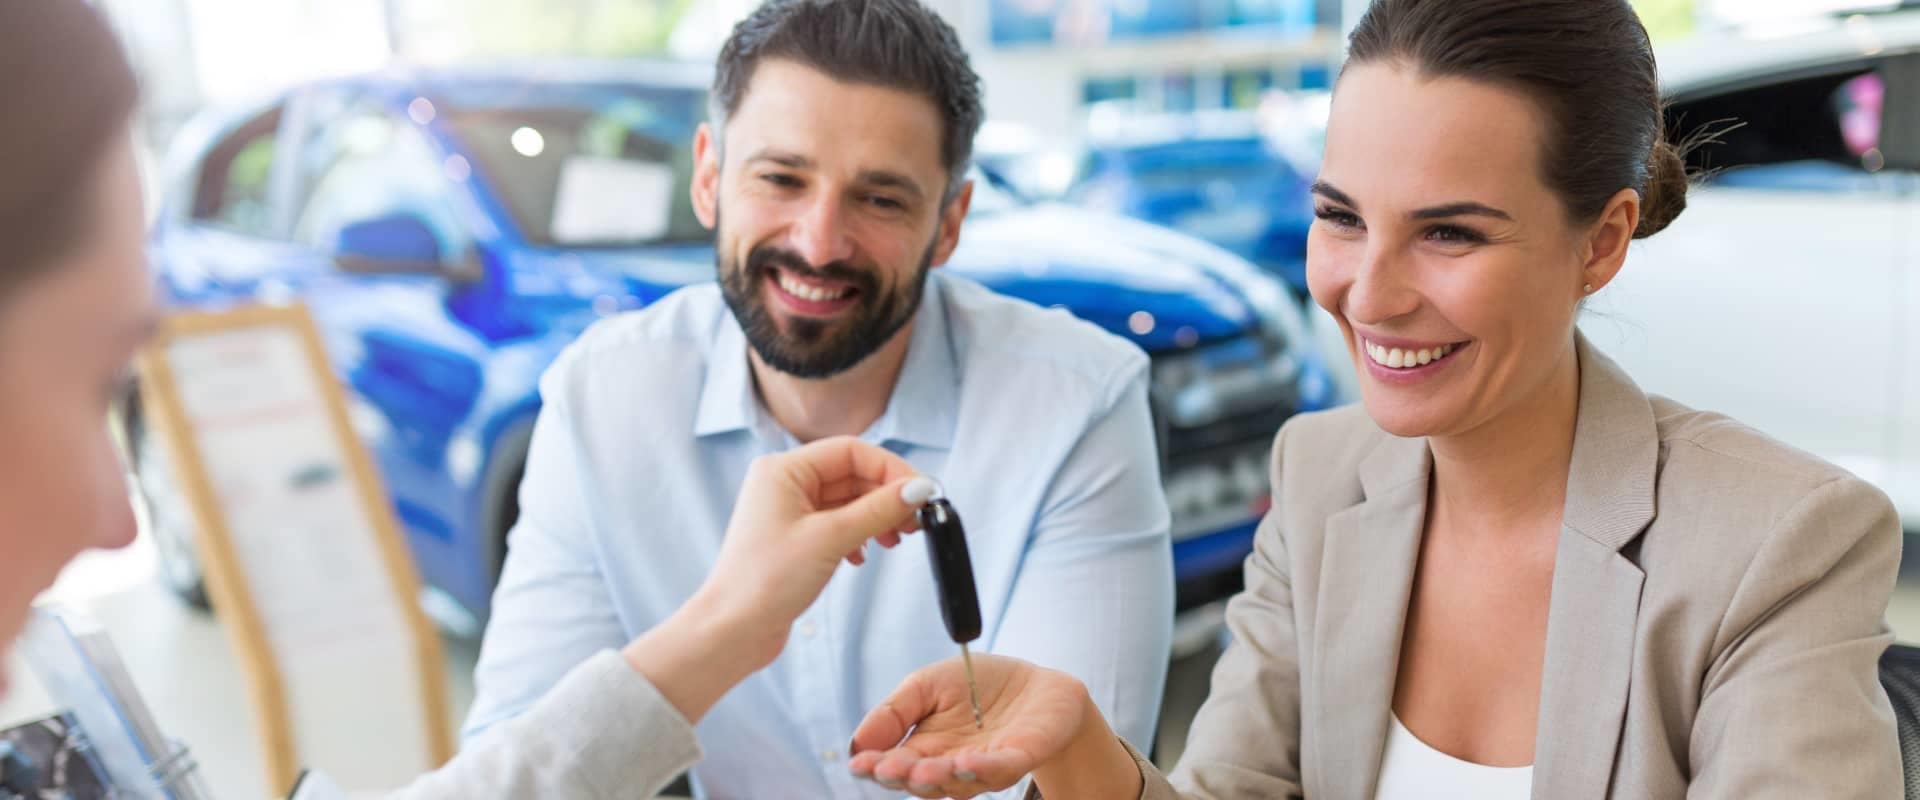 finance officer hands car key to smiling couple